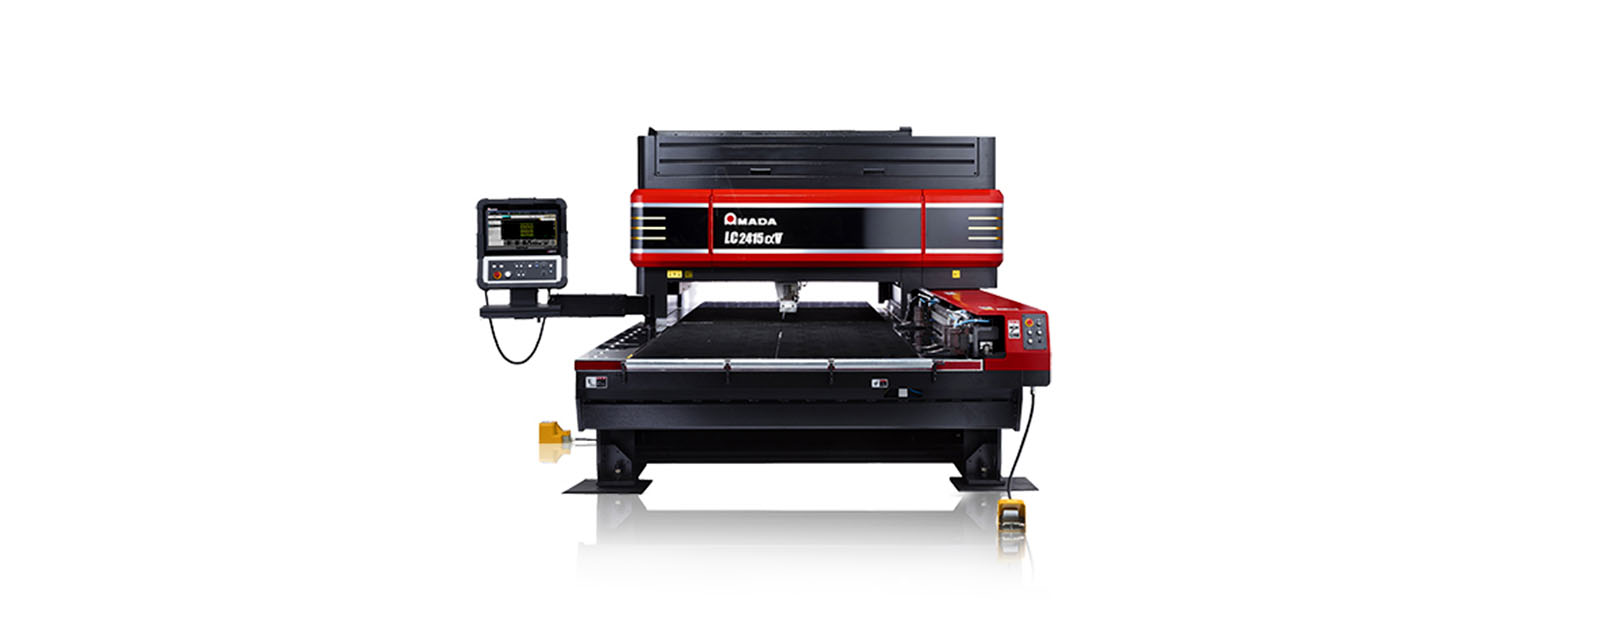 LC-αV NT laser cutting machine with easy loading functionality